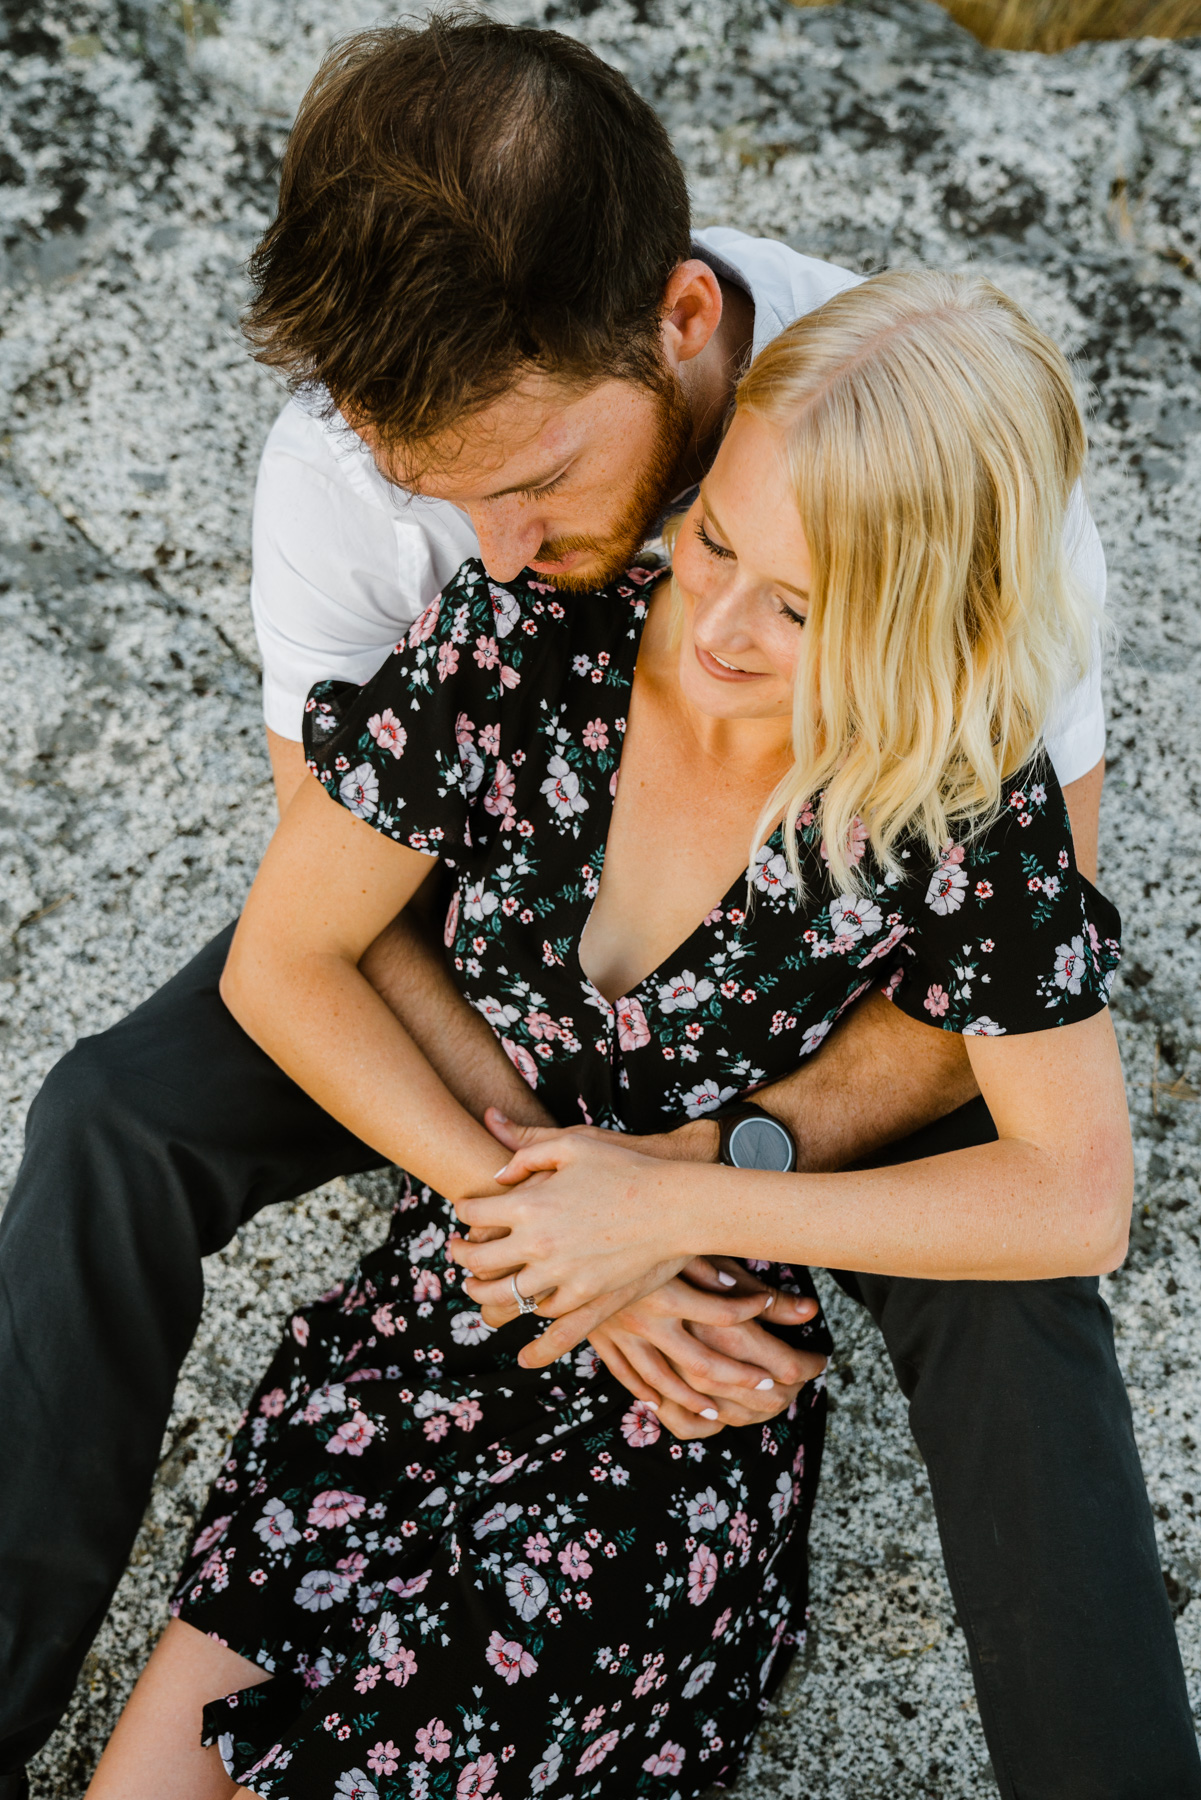 Shaver Lake Engagement Portraits - Meghan and Clay -  by Bessie Young Photography 2018 A7R2-178.jpg